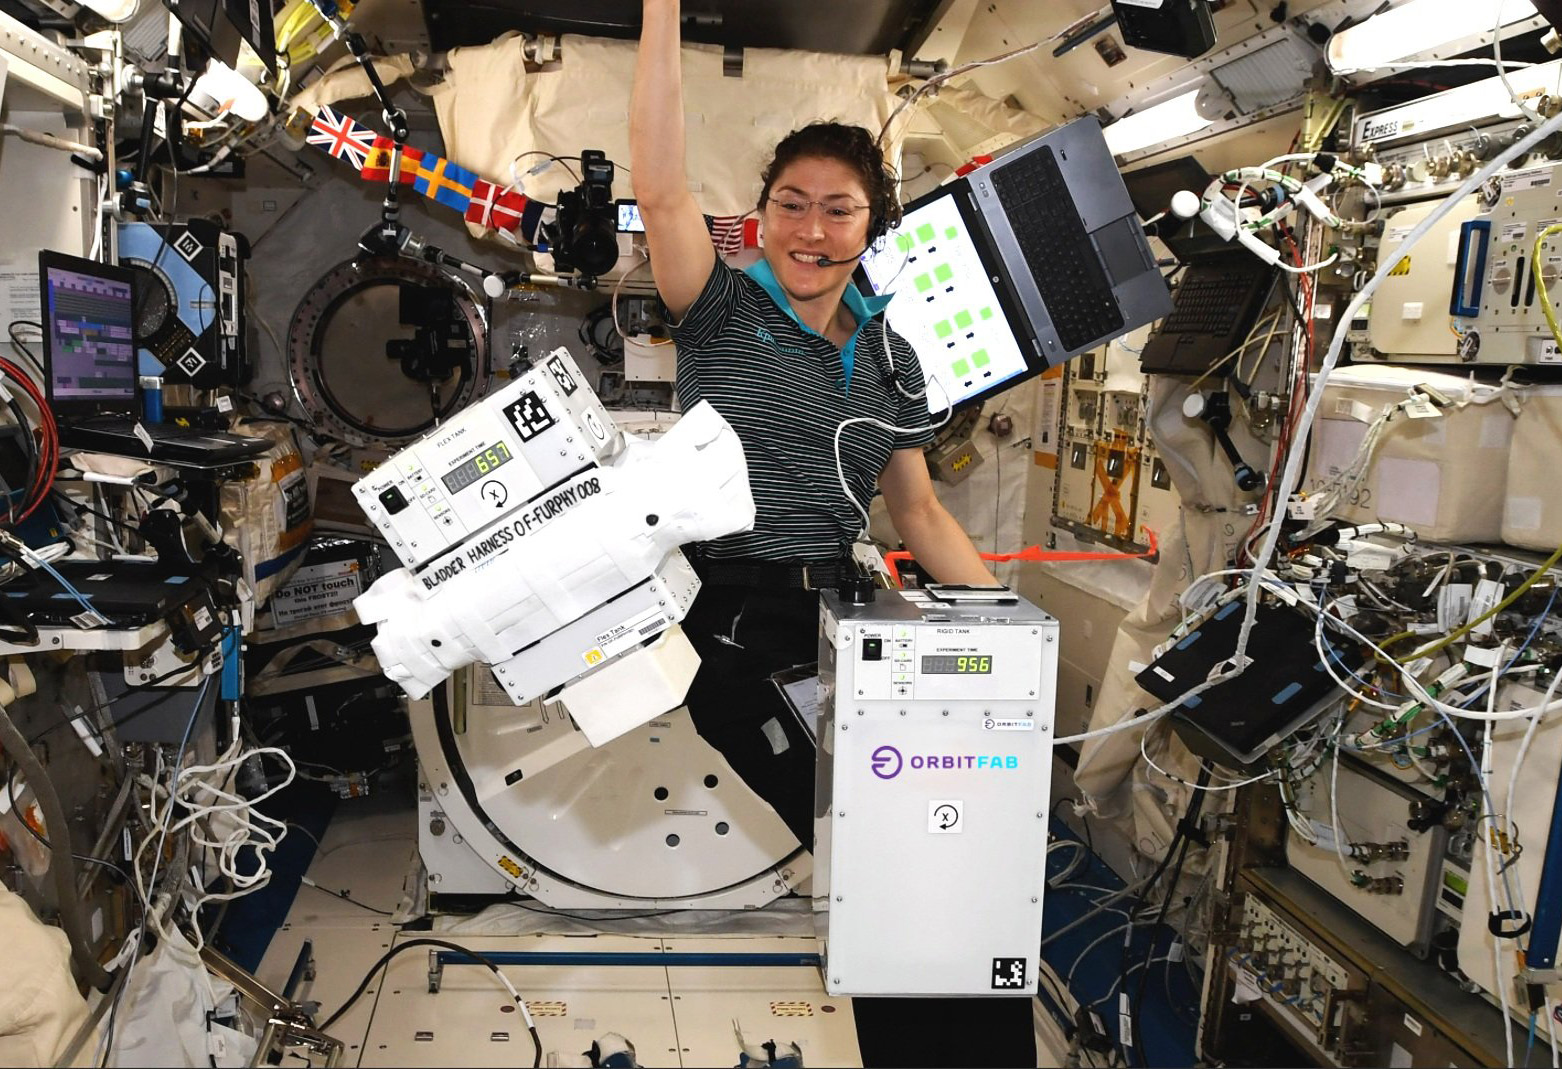 Orbit Fab's FURPHY mission payloads floating on the ISS with astronaut